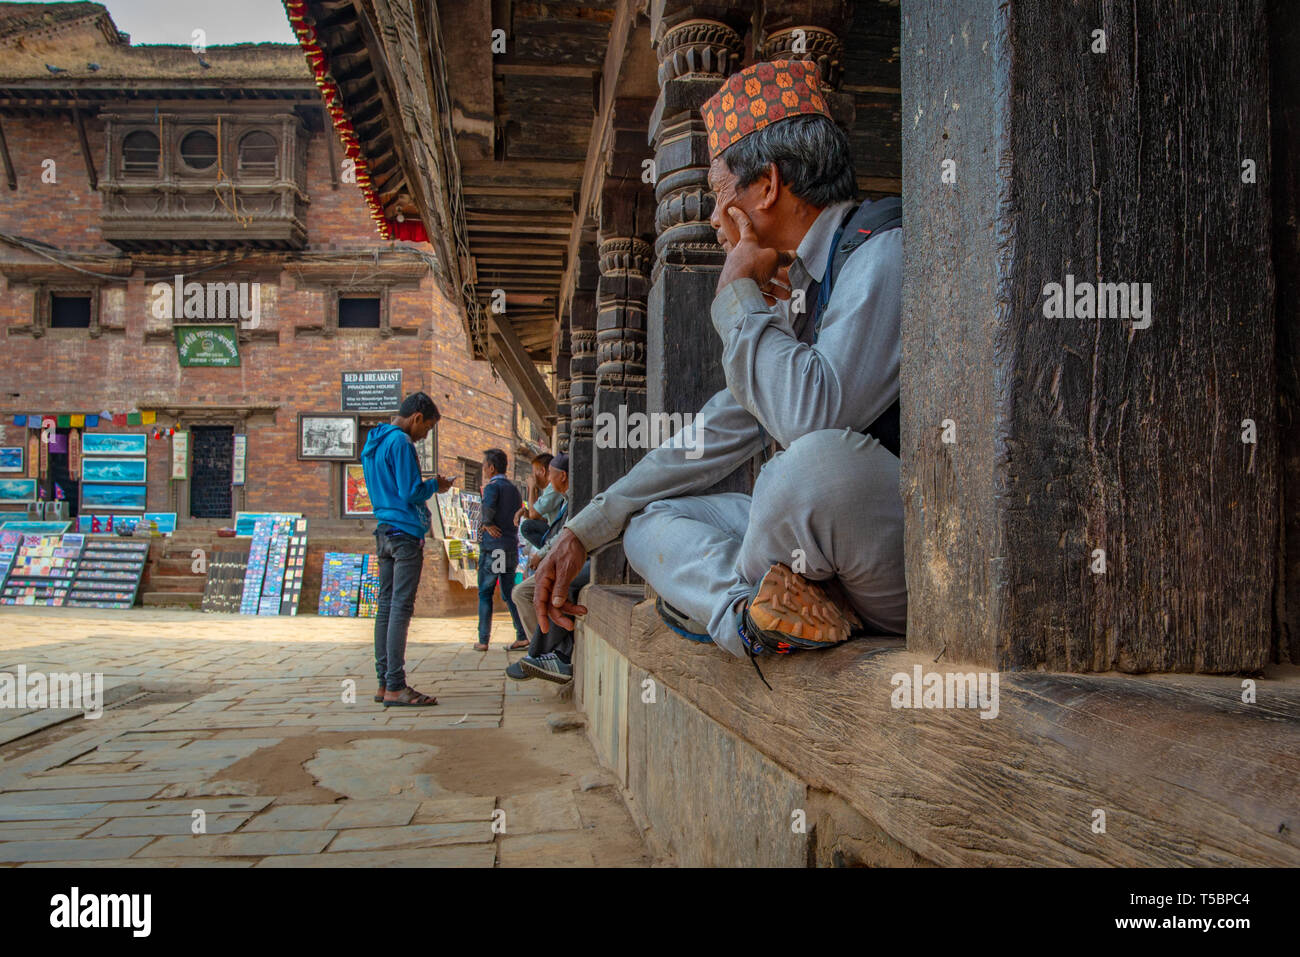 BHAKTAPUR, NEPAL - APRIL 5, 2019: Old man with traditional nepalese hat staring at passers-by Stock Photo